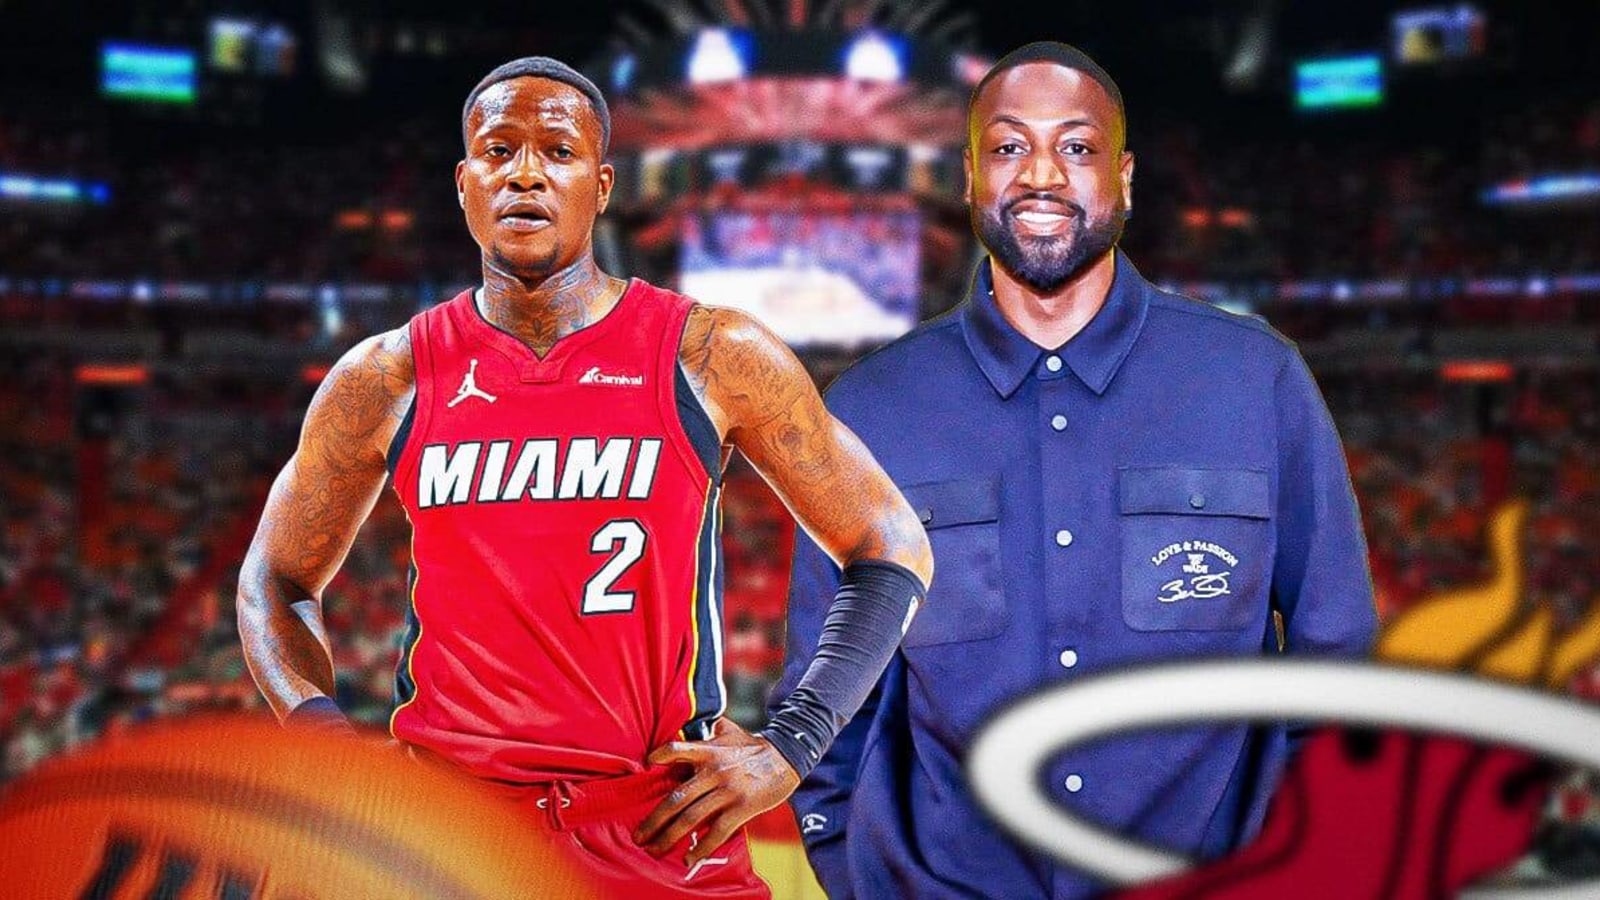 Terry Rozier cites Dwyane Wade as main reason for Heat trade